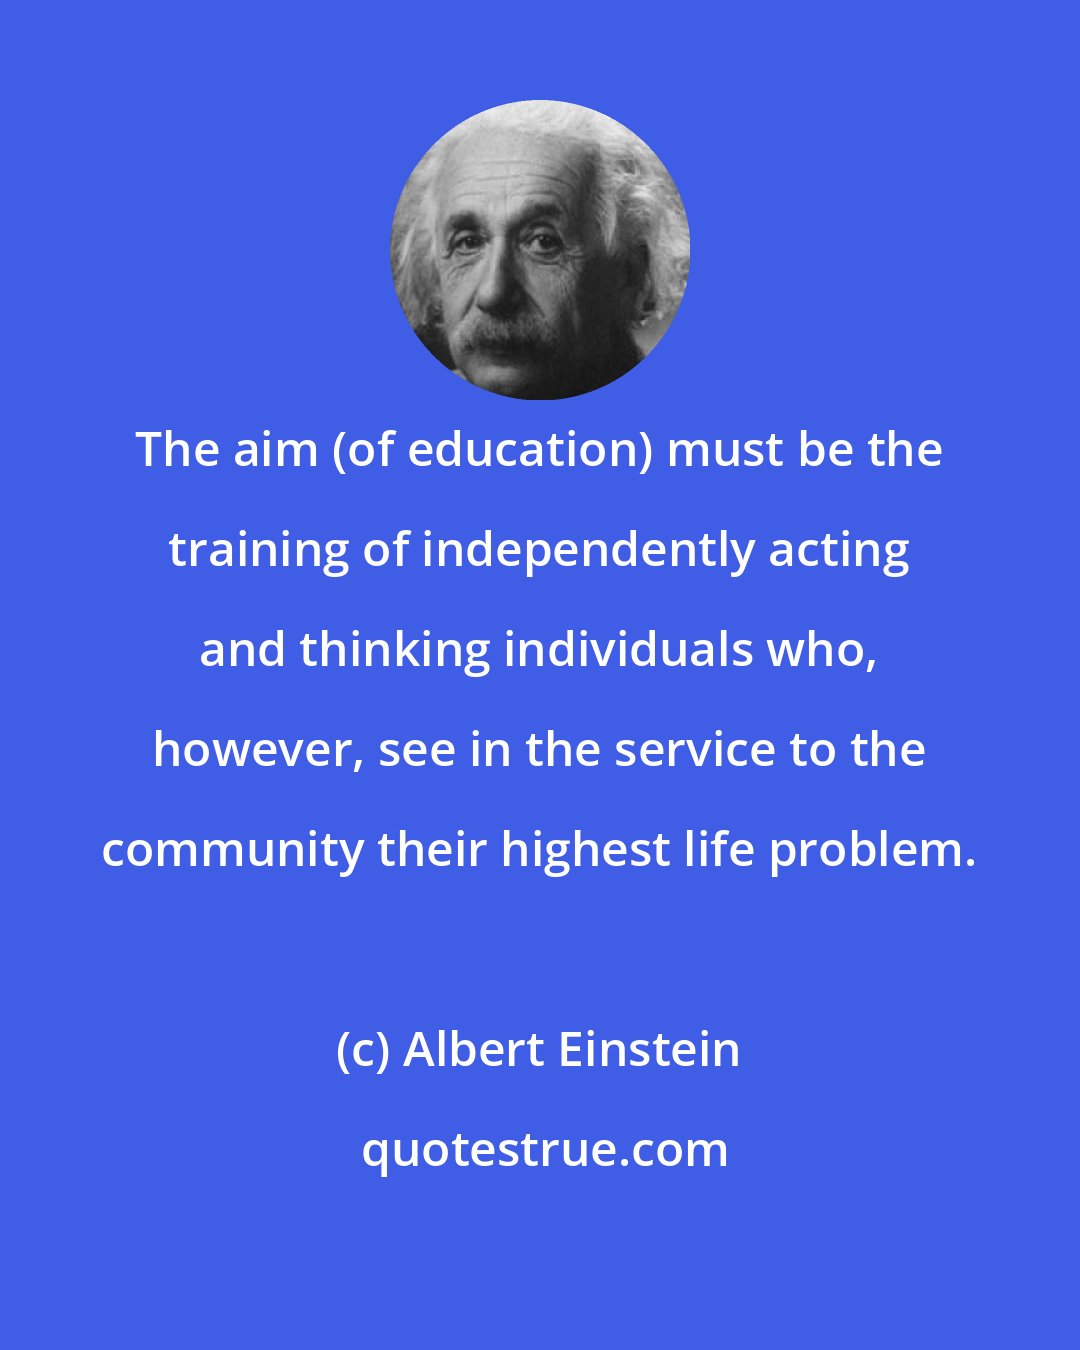 Albert Einstein: The aim (of education) must be the training of independently acting and thinking individuals who, however, see in the service to the community their highest life problem.